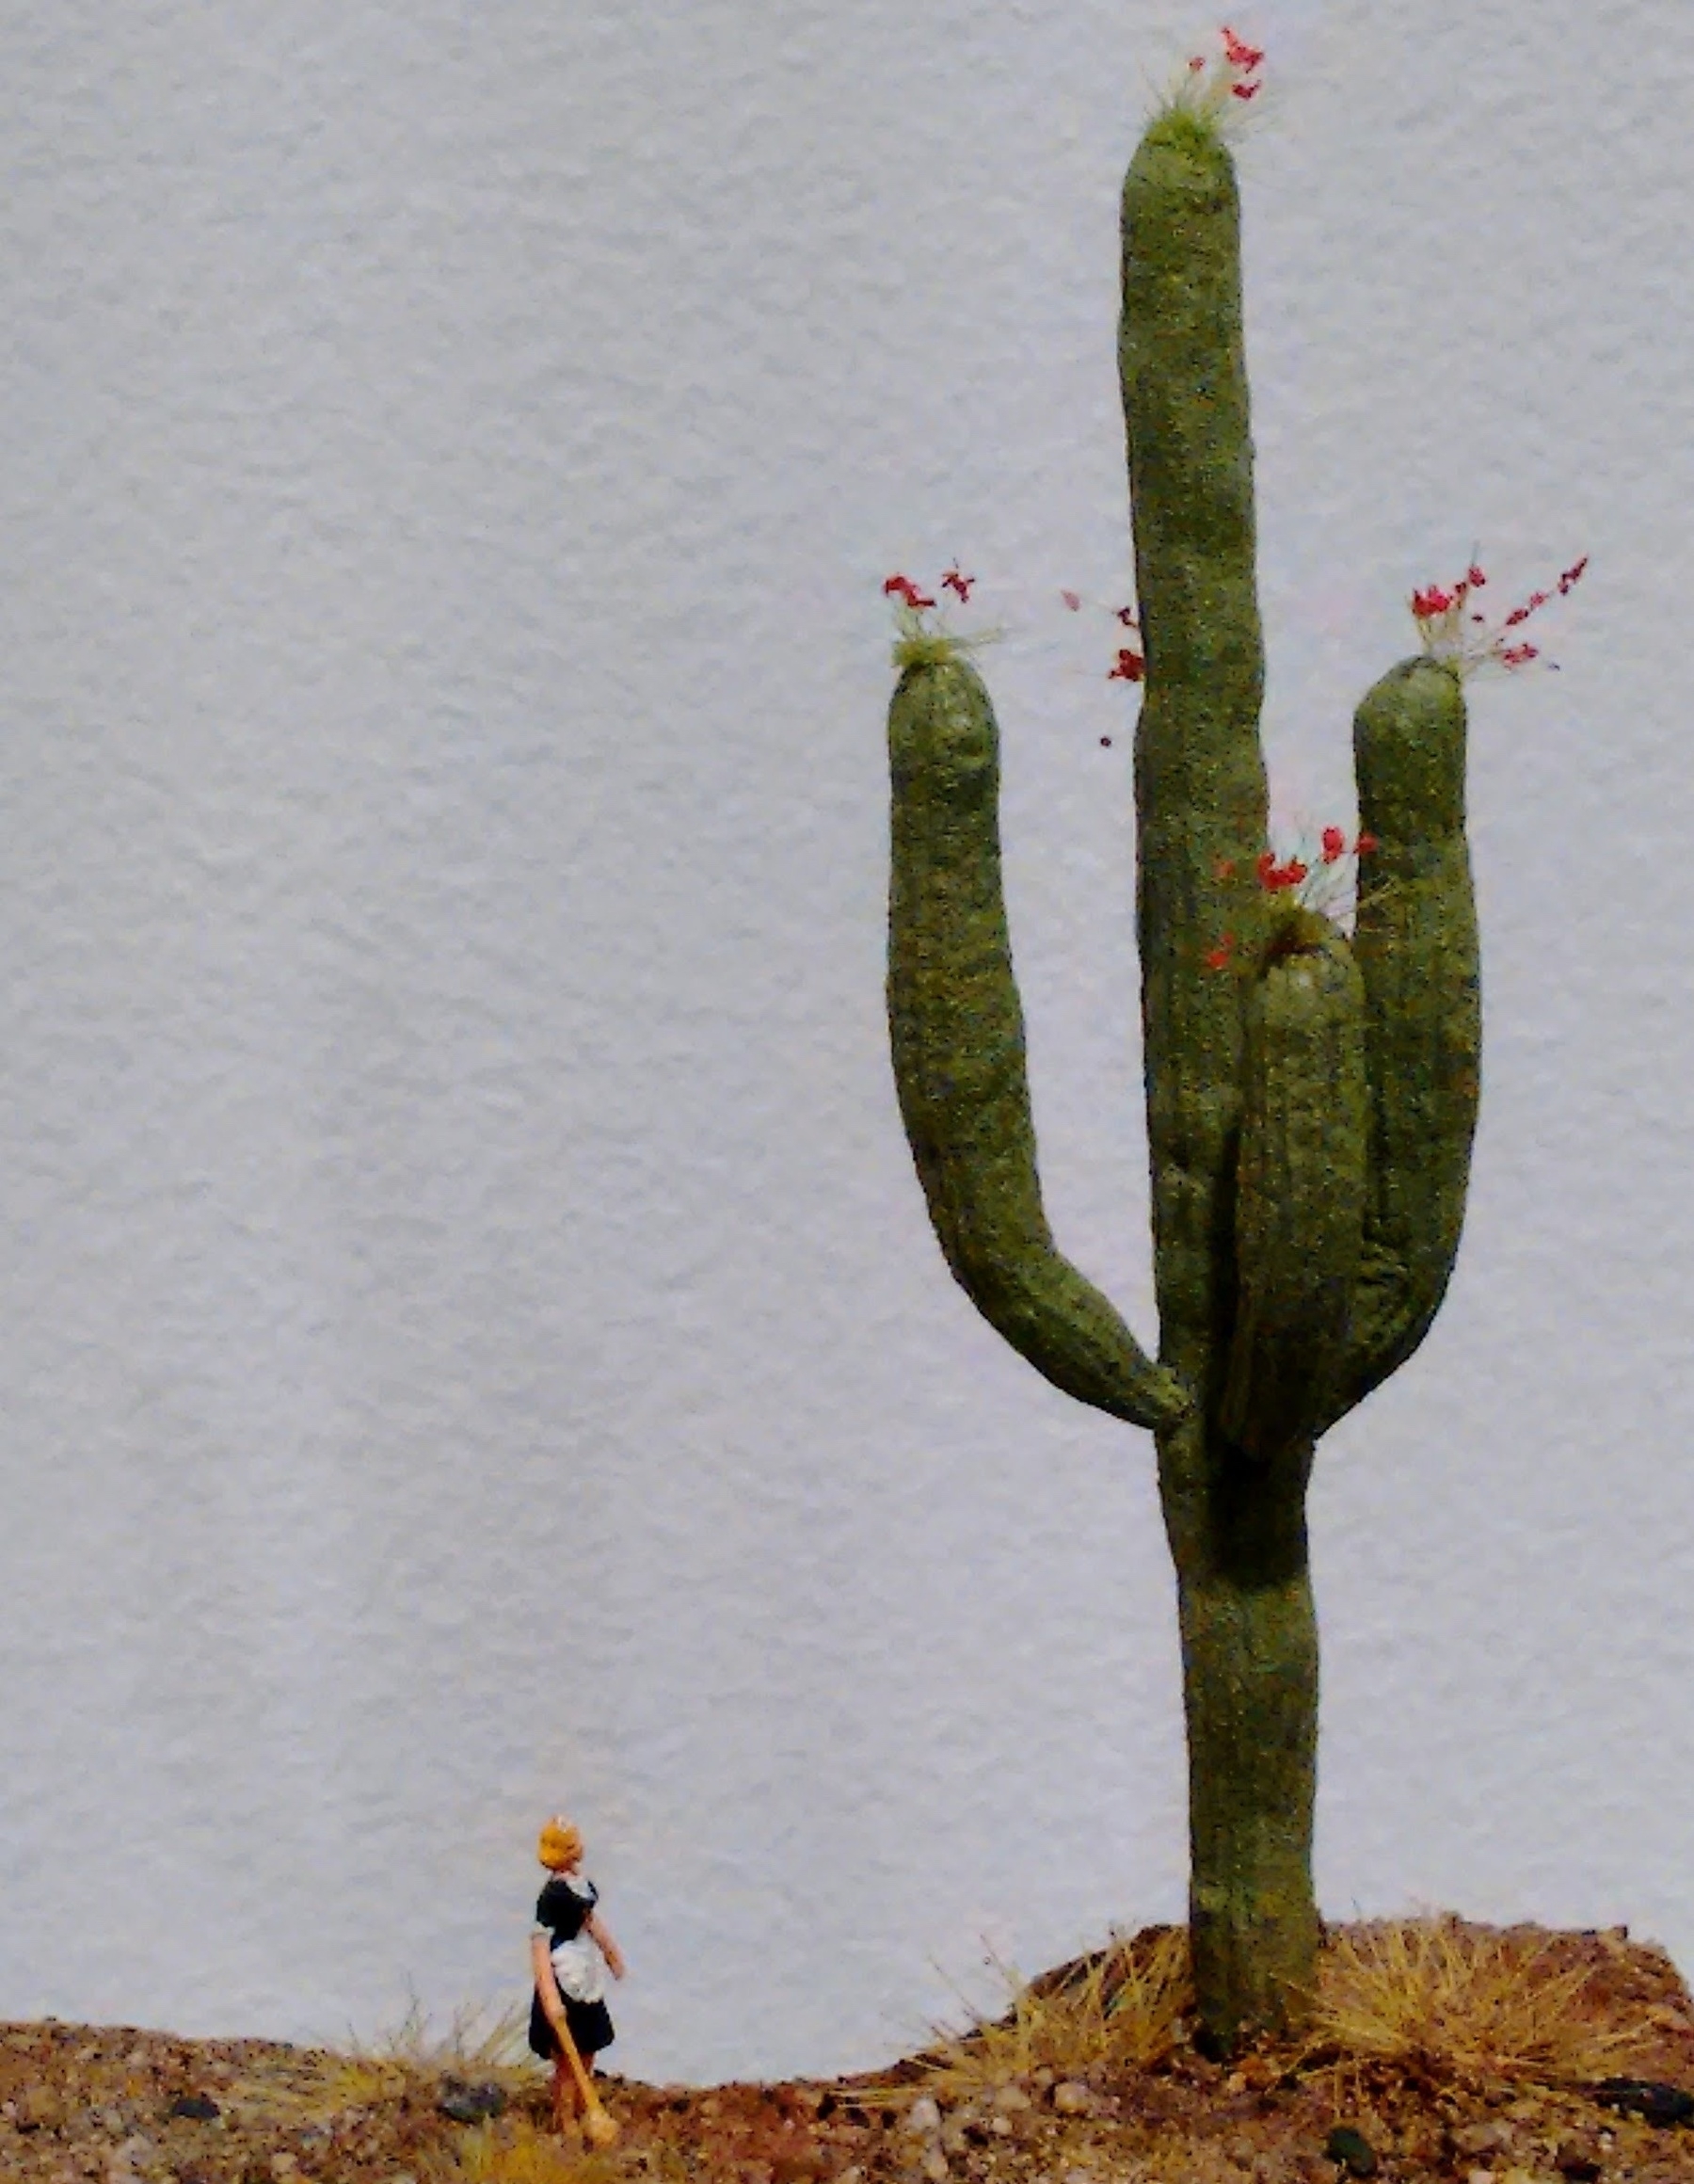 A model diorama of a woman looking at a large cactus. It’s an artwork by Karl De Waal.